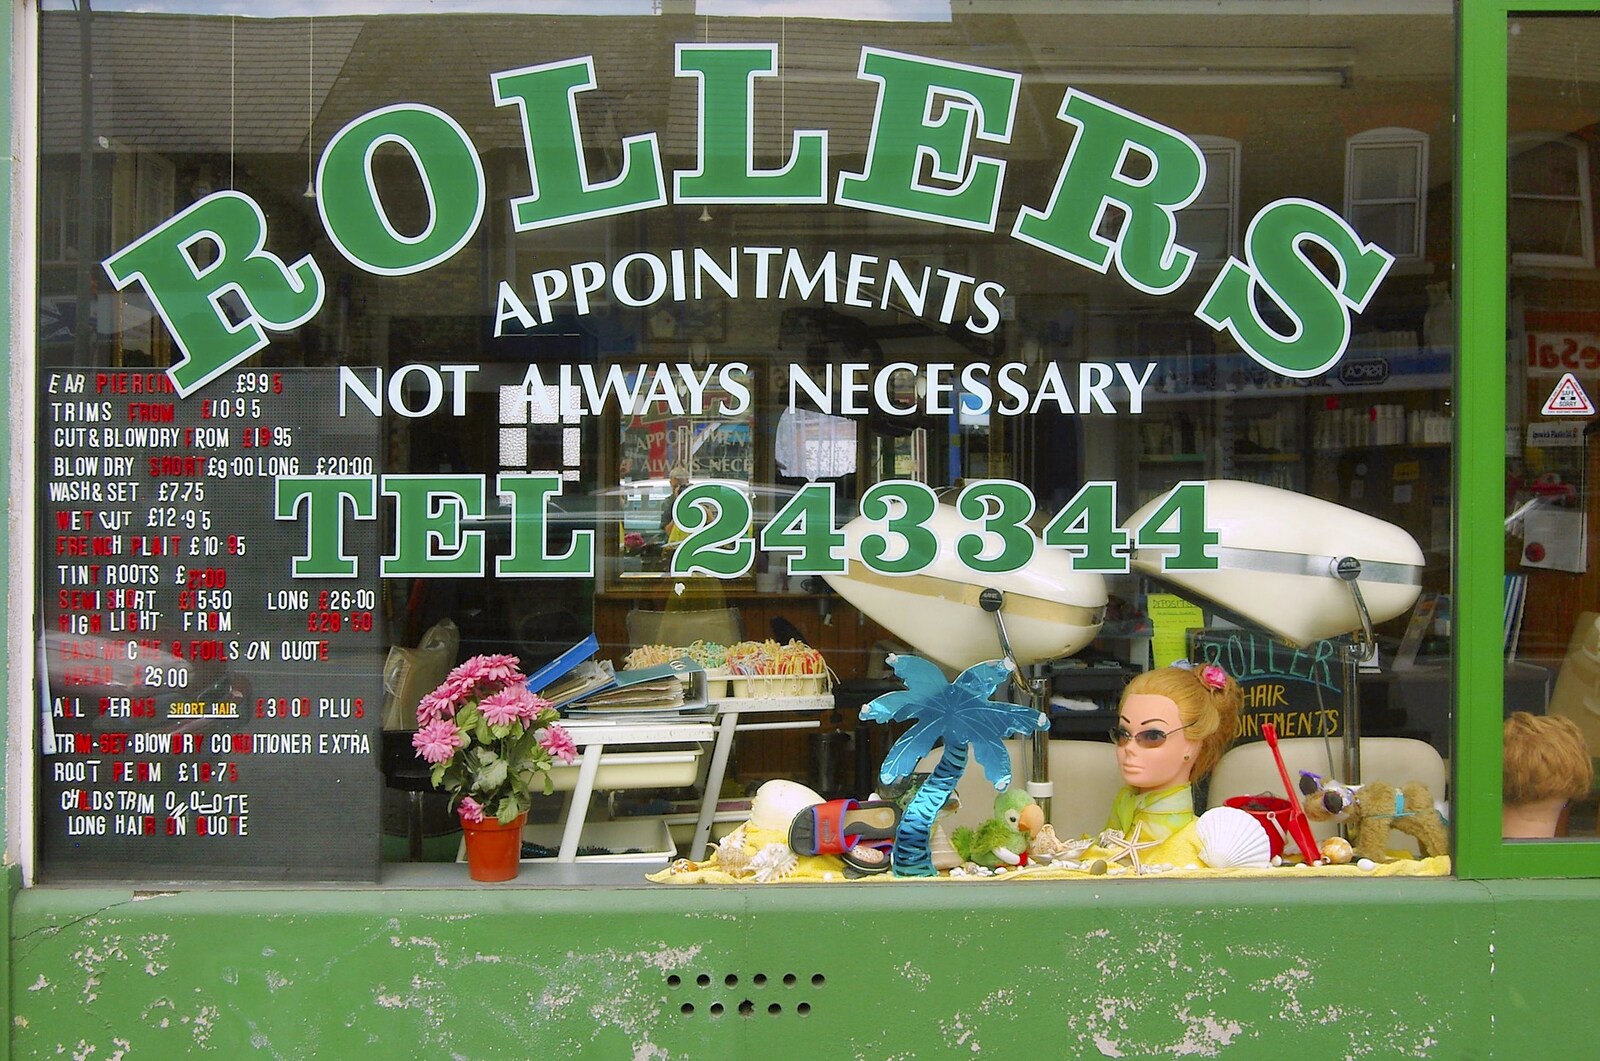 Rollers: A hairdresser's window on Mill Road from A Kingston Street Barbeque with Rachel and Sam, North Romsey, Cambridge- 2nd August 2006